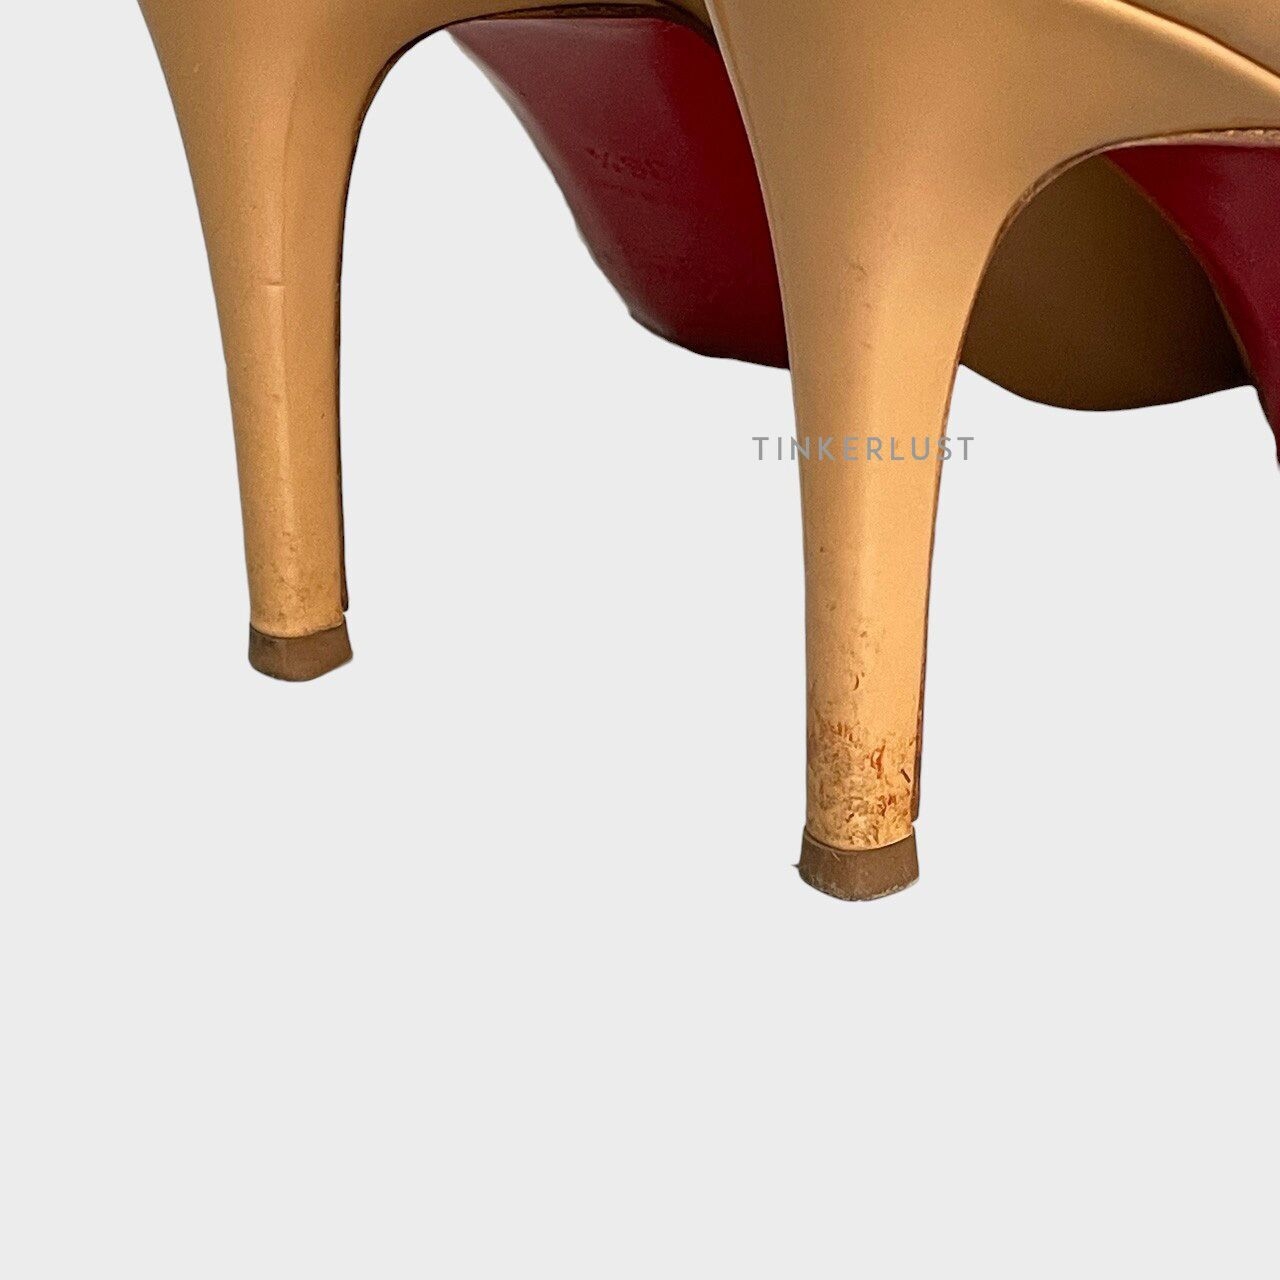 Christian Louboutin Pigalle Nude Patent Pumps